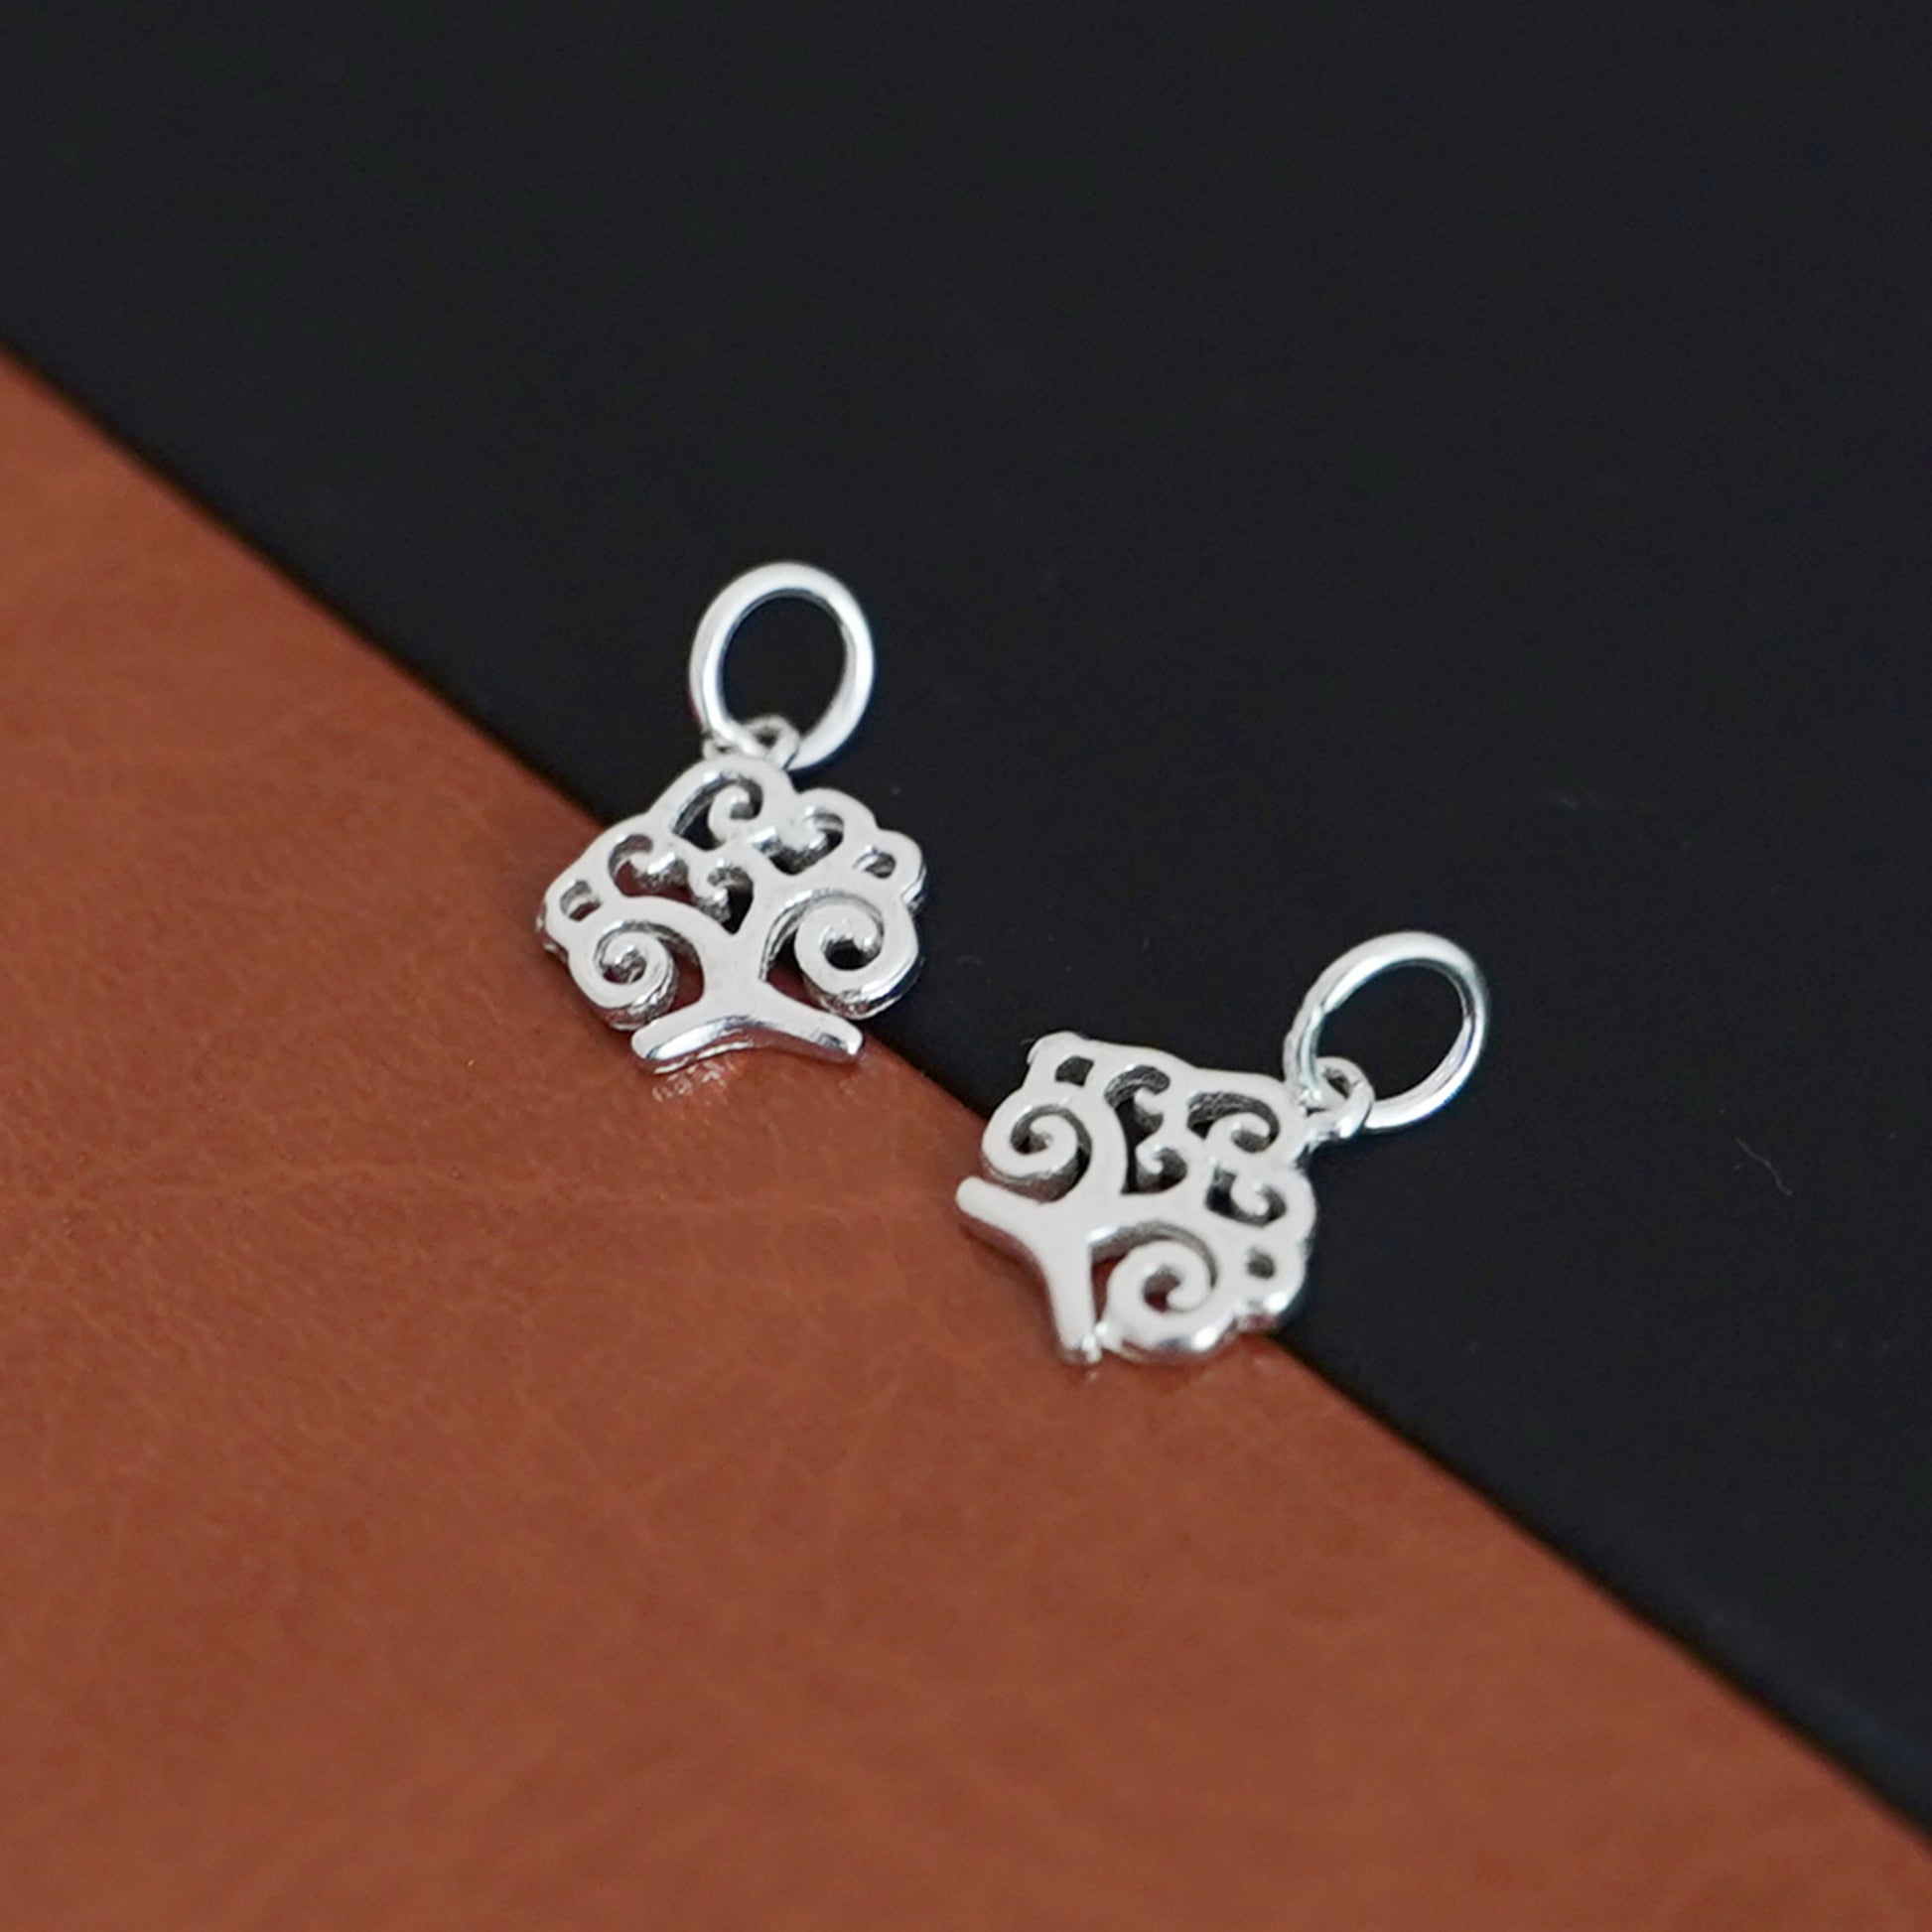 2pcs Sterling Silver Tree of Life Pendants with Charms - sugarkittenlondon